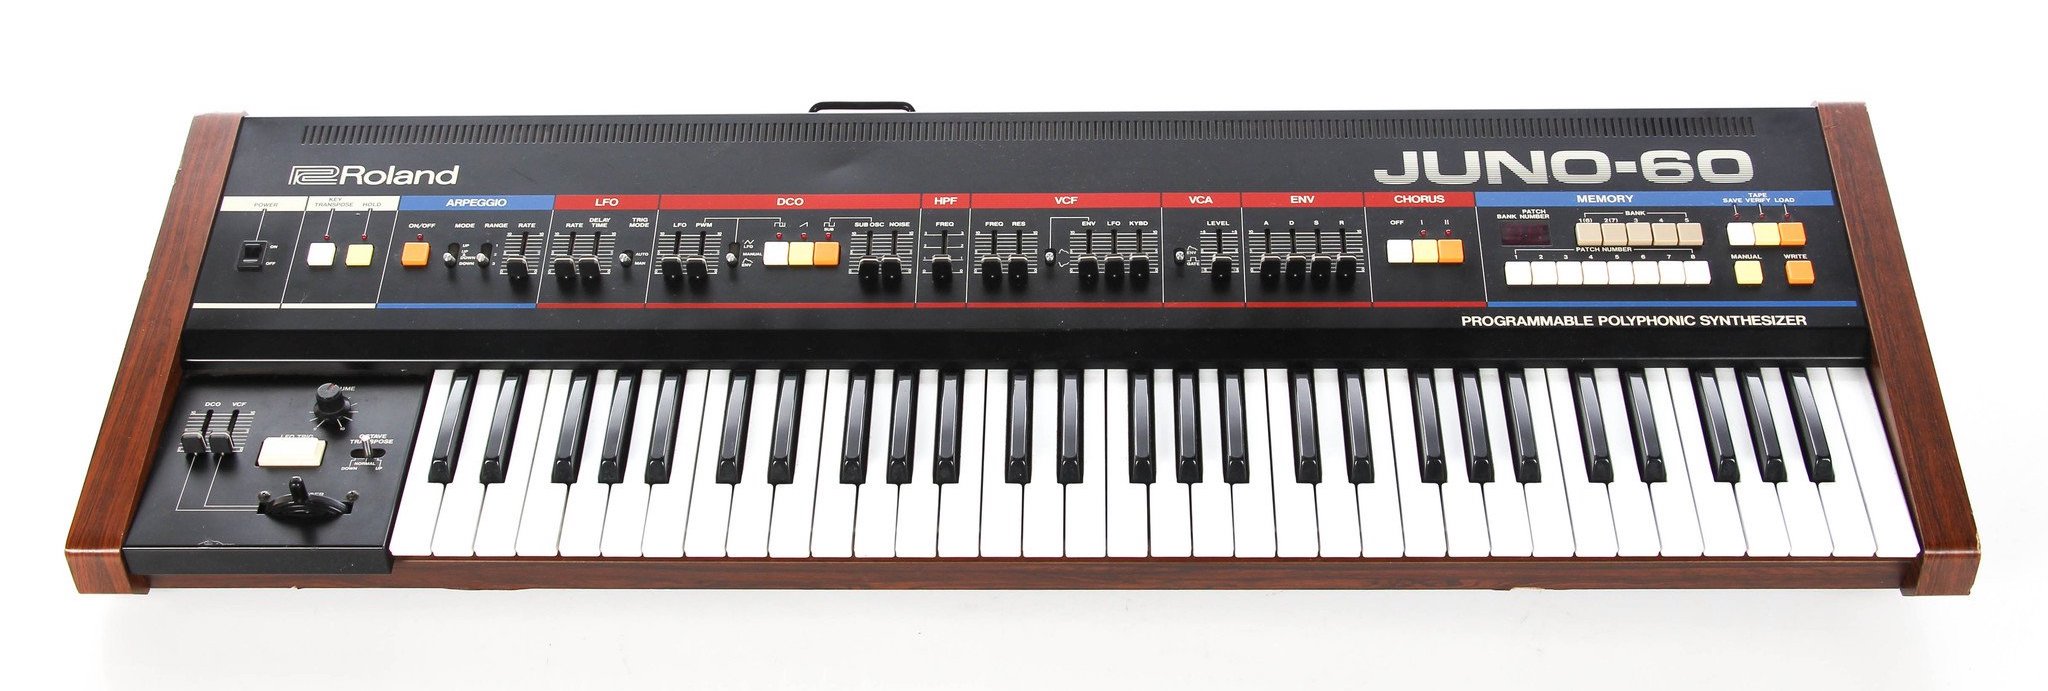 A photo of the Juno-60